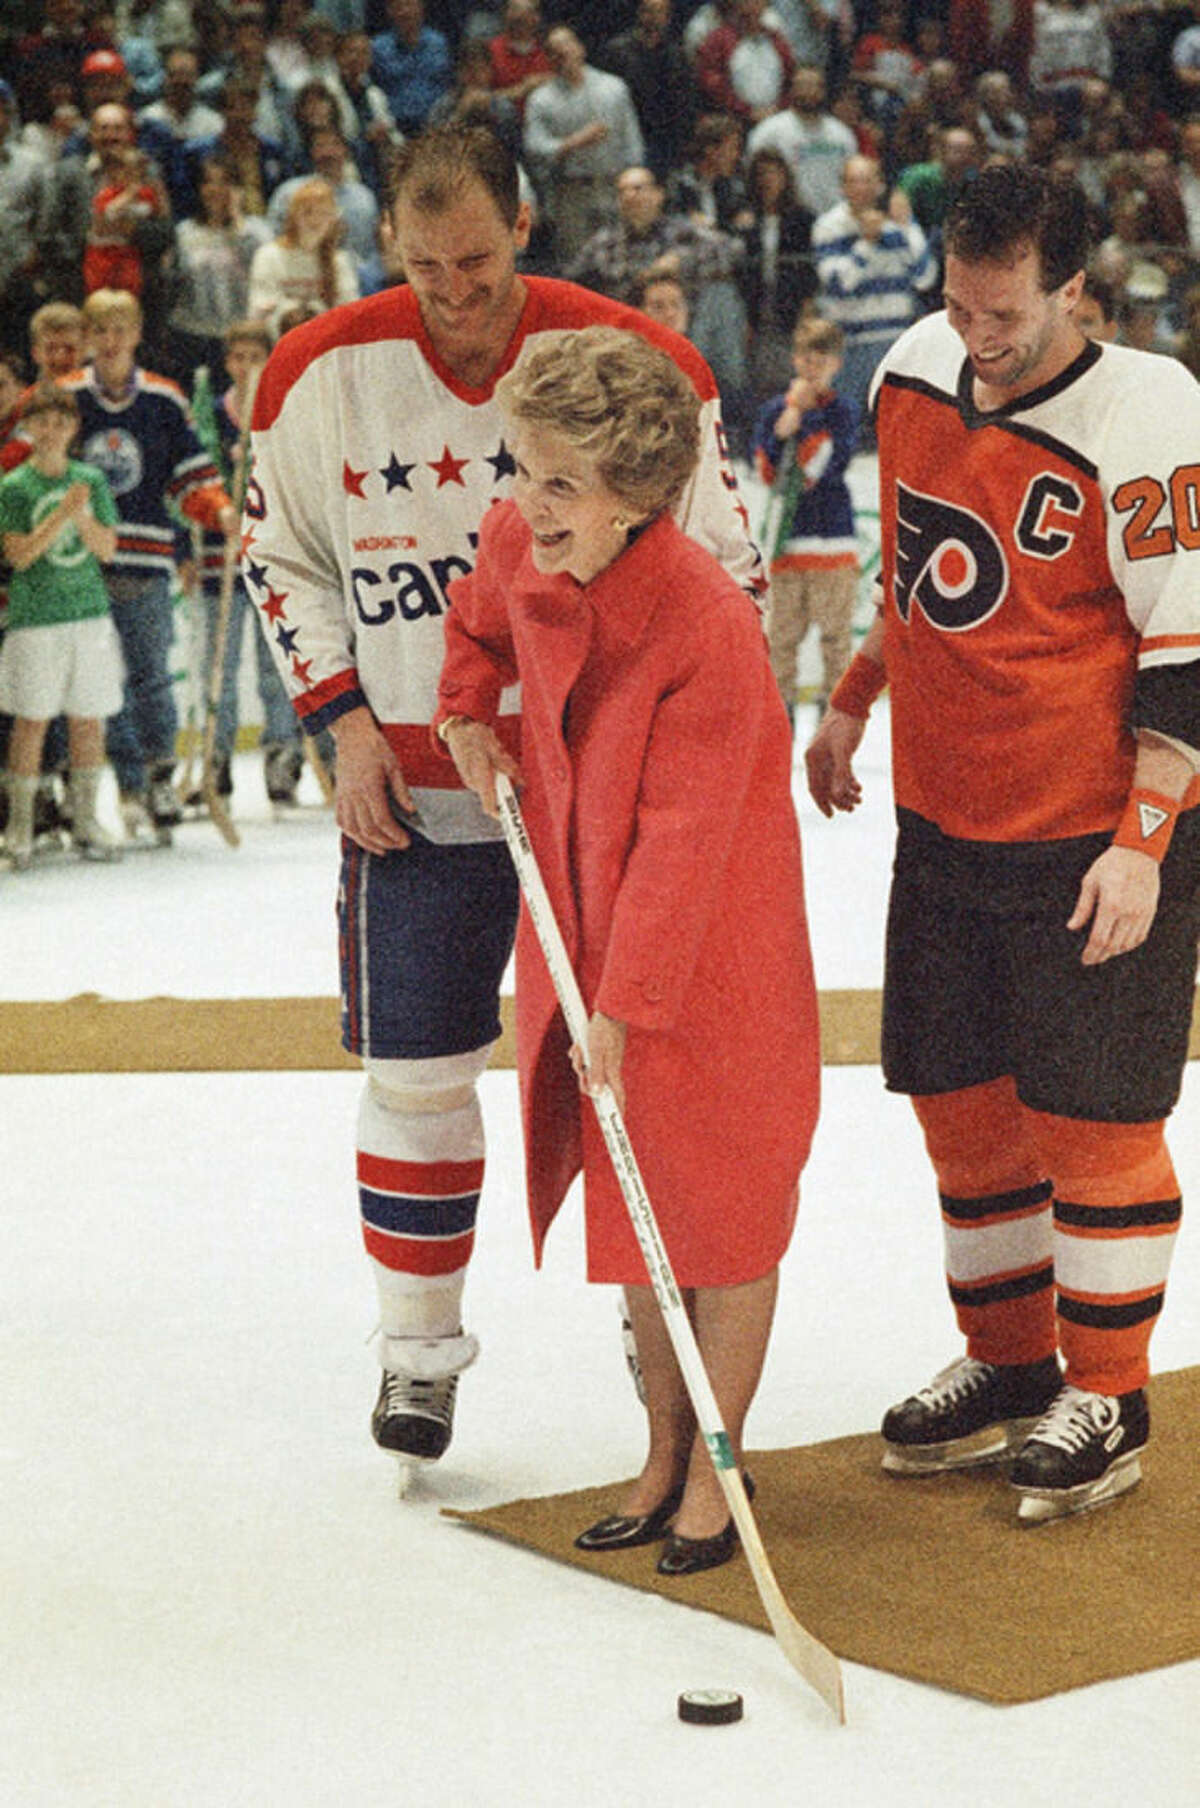 FILE - In this March 25, 1988 file photo, then first lady Nancy Reagan kicks off the NHL's "Just Say No" campaign to help overcome drug abuse among young people, with the help of Washington Capitals captain Red Langway and Philadelphia Fliers captain Dave Poulin, before a hockey game in Landover, Md. Reagan, who died Sunday, March 6, 2016, is perhaps best known for her "Just Say No" to drugs and alcohol campaign. Three decades after the campaign's heyday, prevention experts credit it with spawning a new generation of research into the best ways of reducing drug abuse. But they also say that many of the fear-based tactics it embraced didn't work.(AP Photo/C.W. Agel II, File)